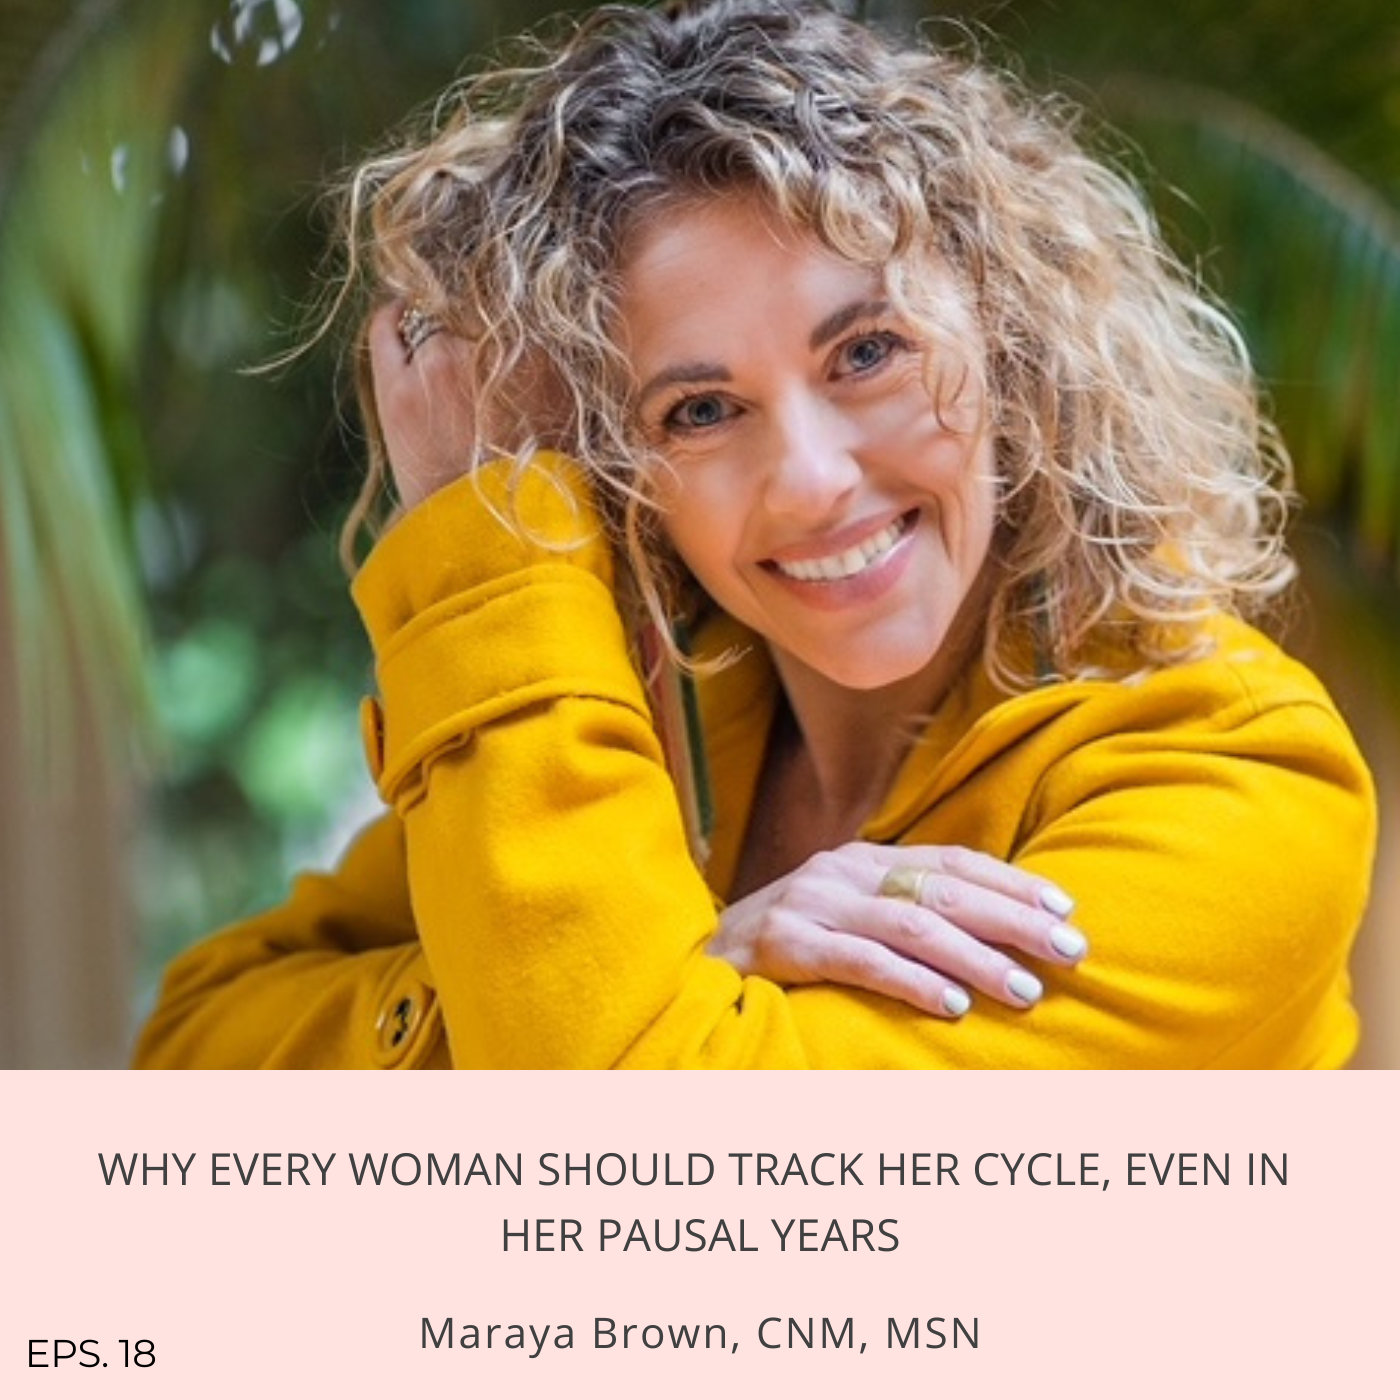 Episode 18: Why every woman should track her cycle, even in her pausal years with Maraya Brown